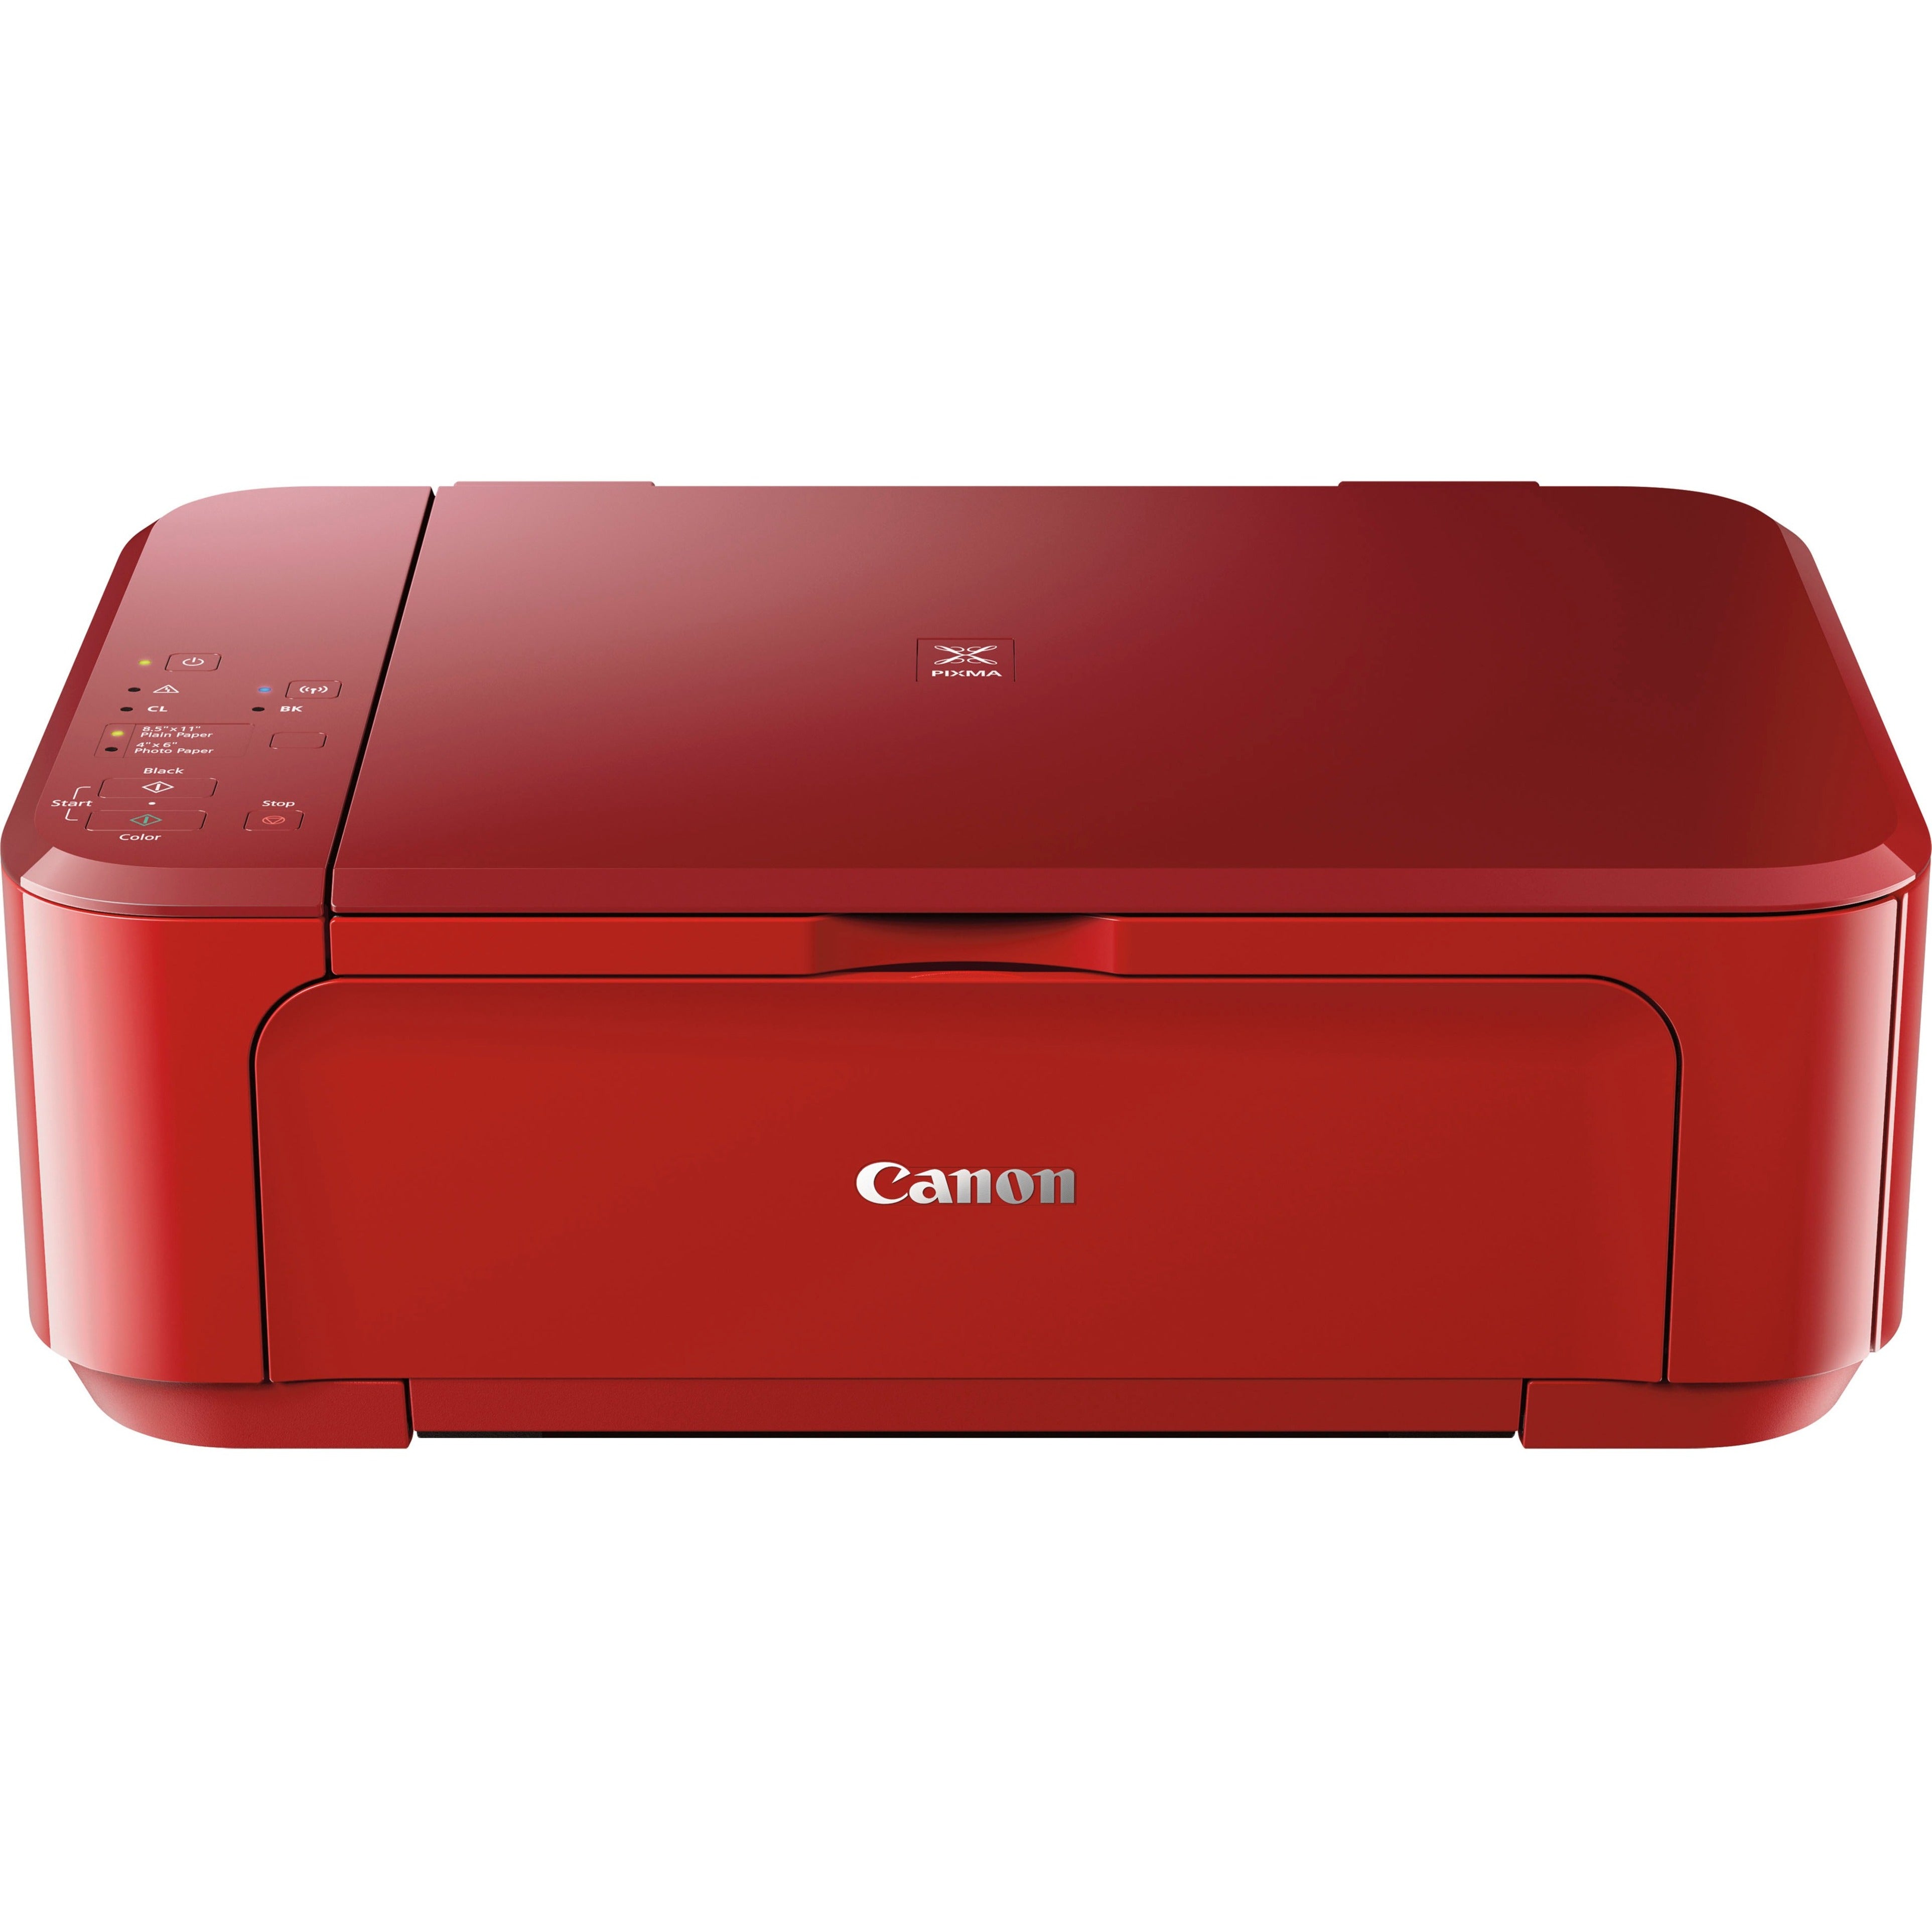 Canon 0515C042 PIXMA MG3620 Wireless Inkjet All-In-One Printer, Color, Flatbed Scanner, 1 Year Warranty, Energy Star, EPEAT Silver, USB, AC Supply